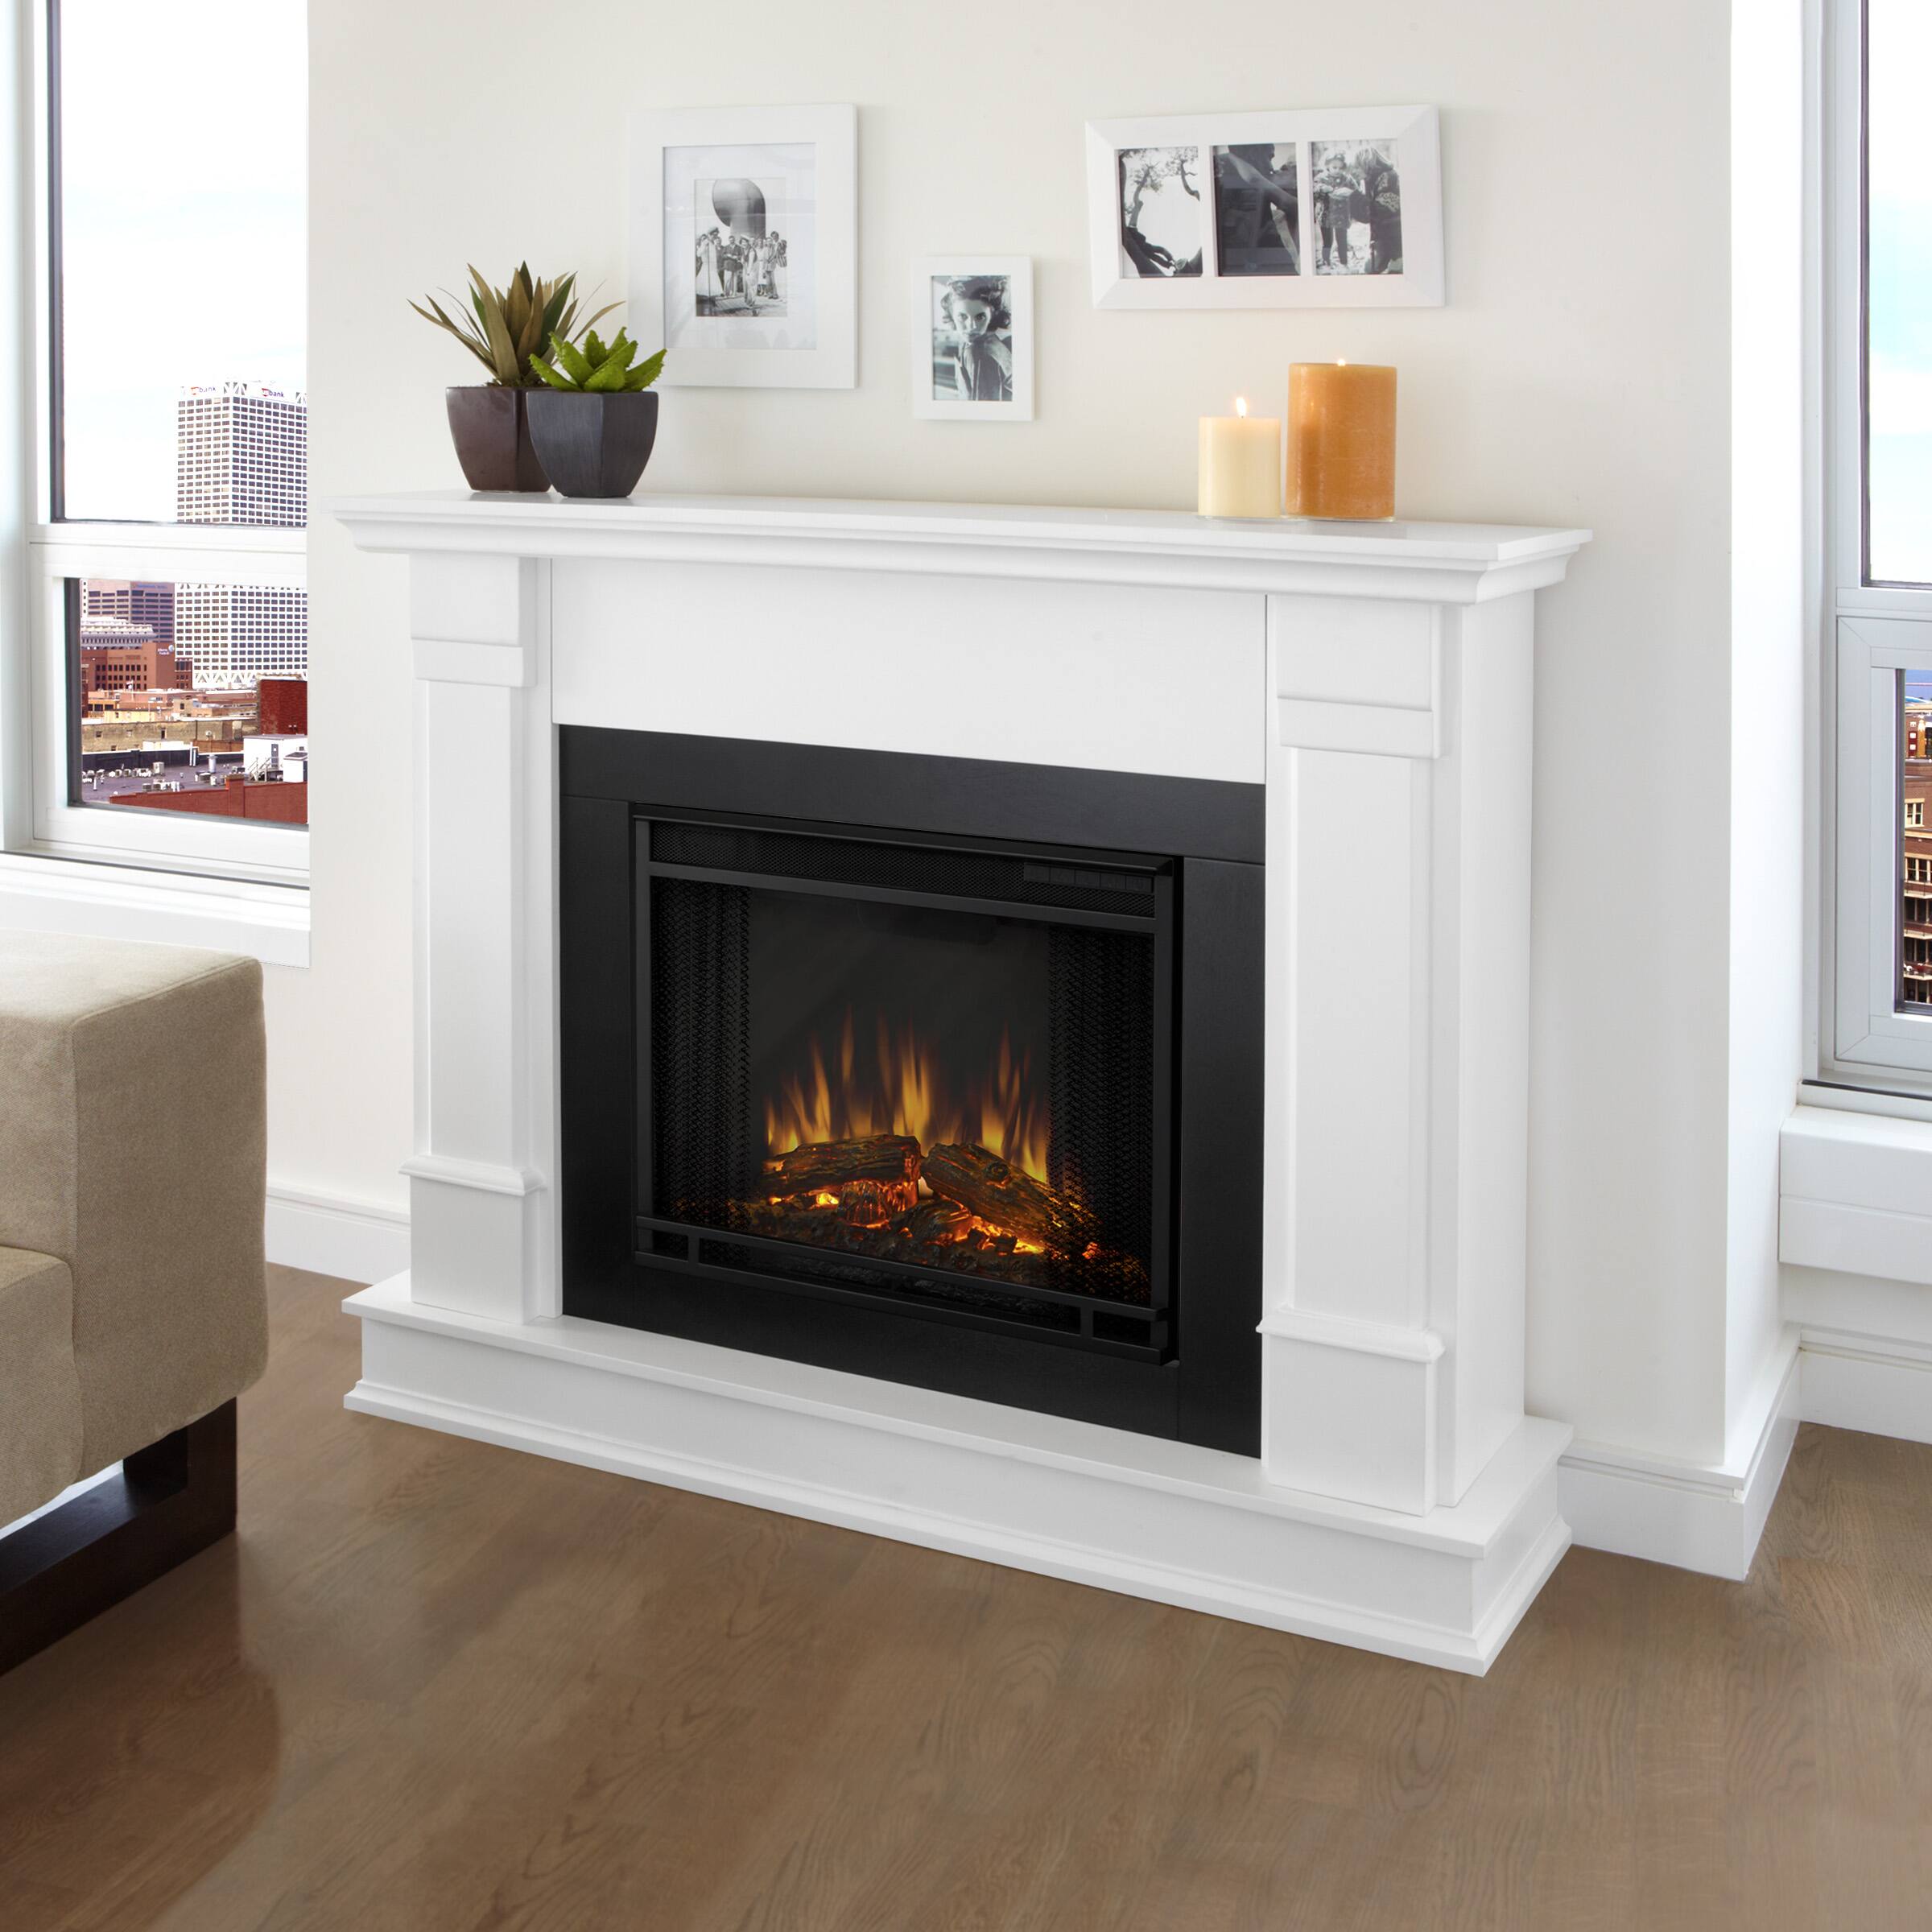 Silverton Electric Fireplace White By Real Flame 48lx13wx41h